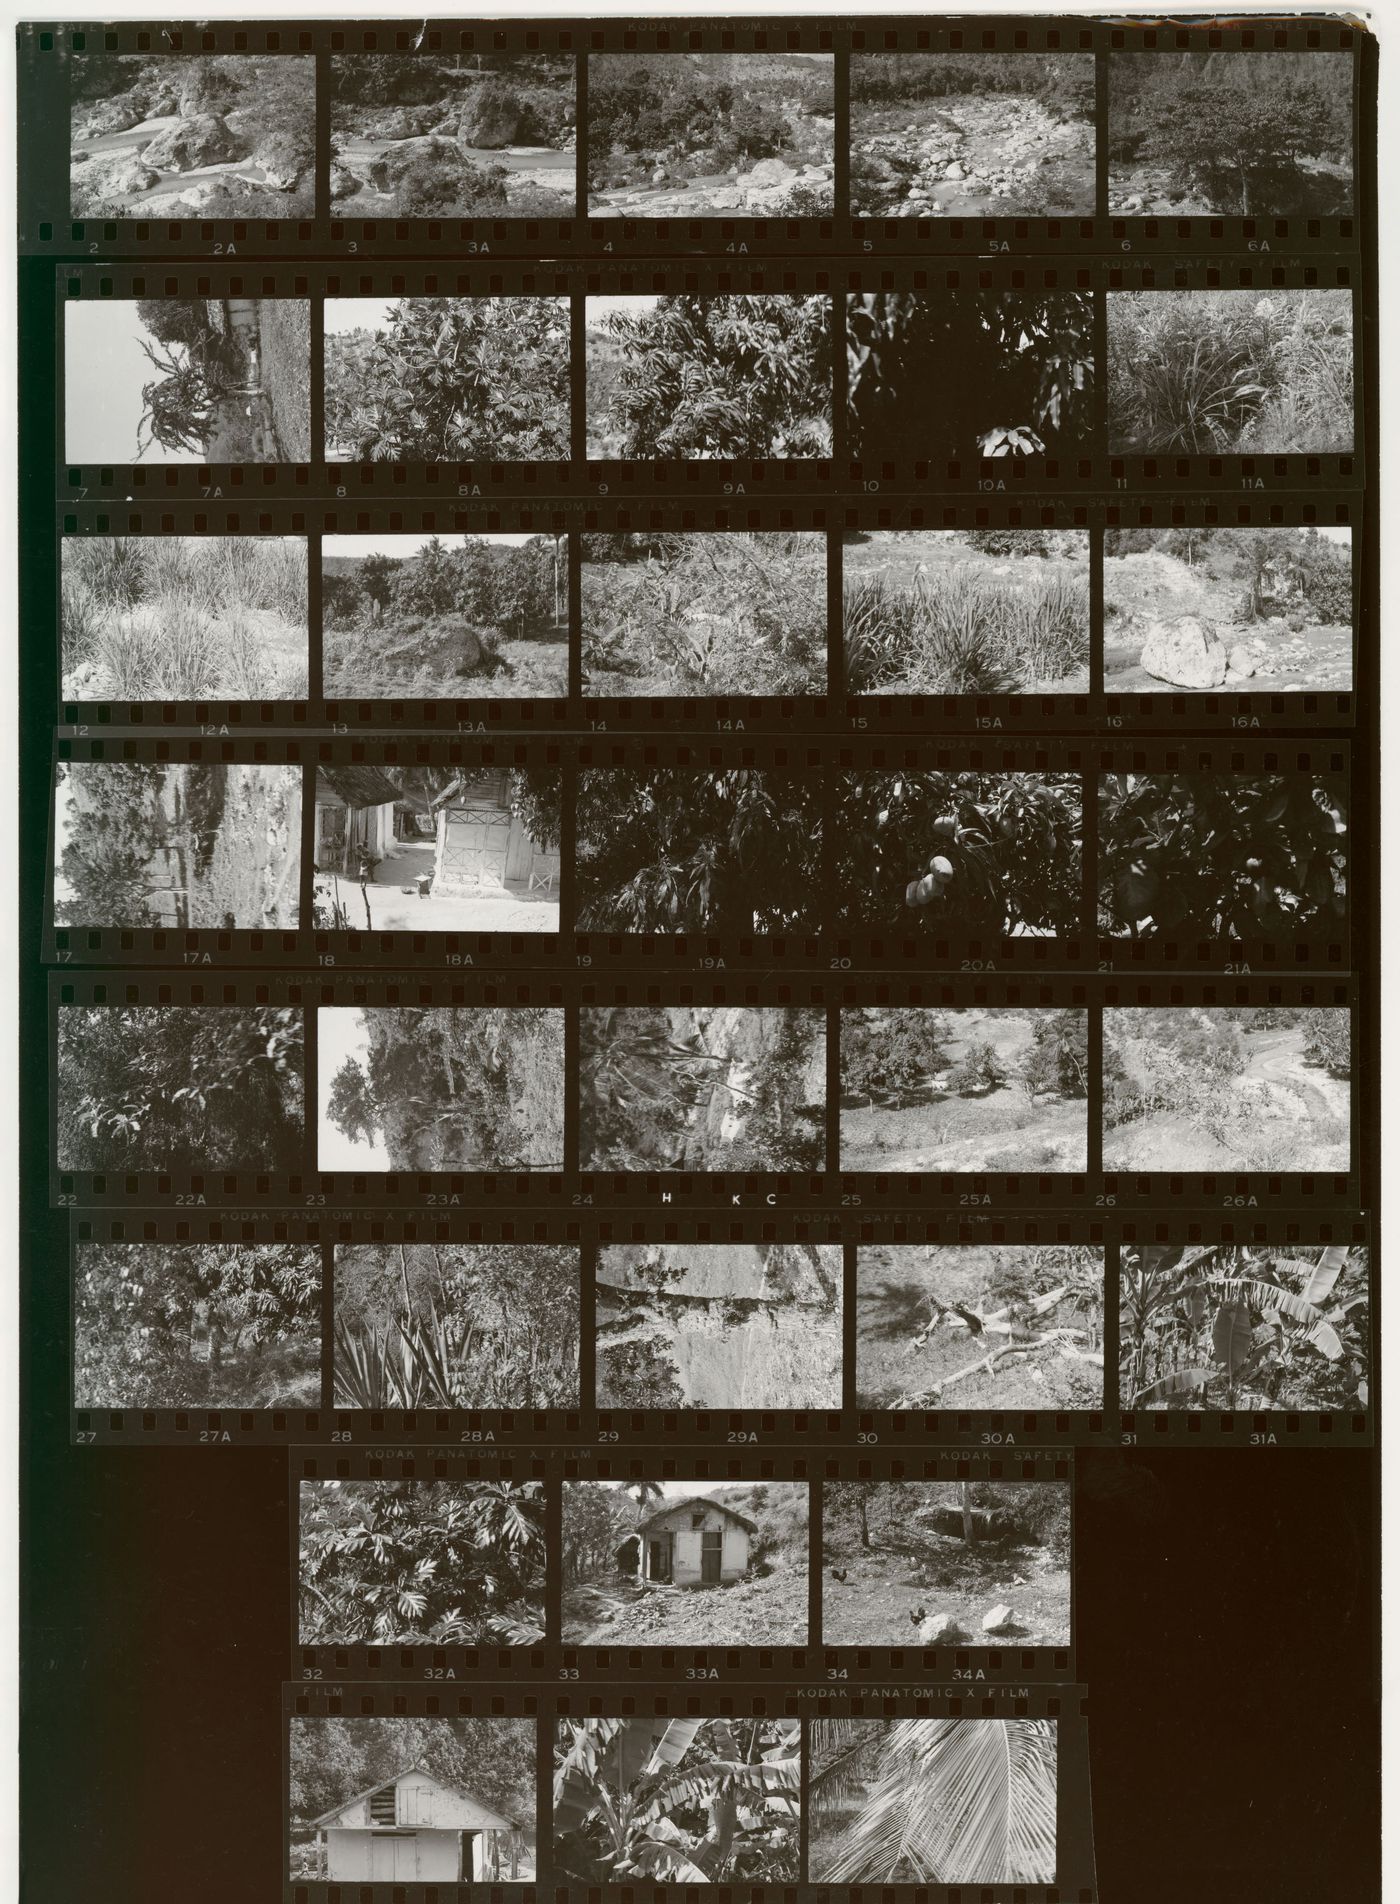 Contact sheet of buildings and landscape views, Haiti